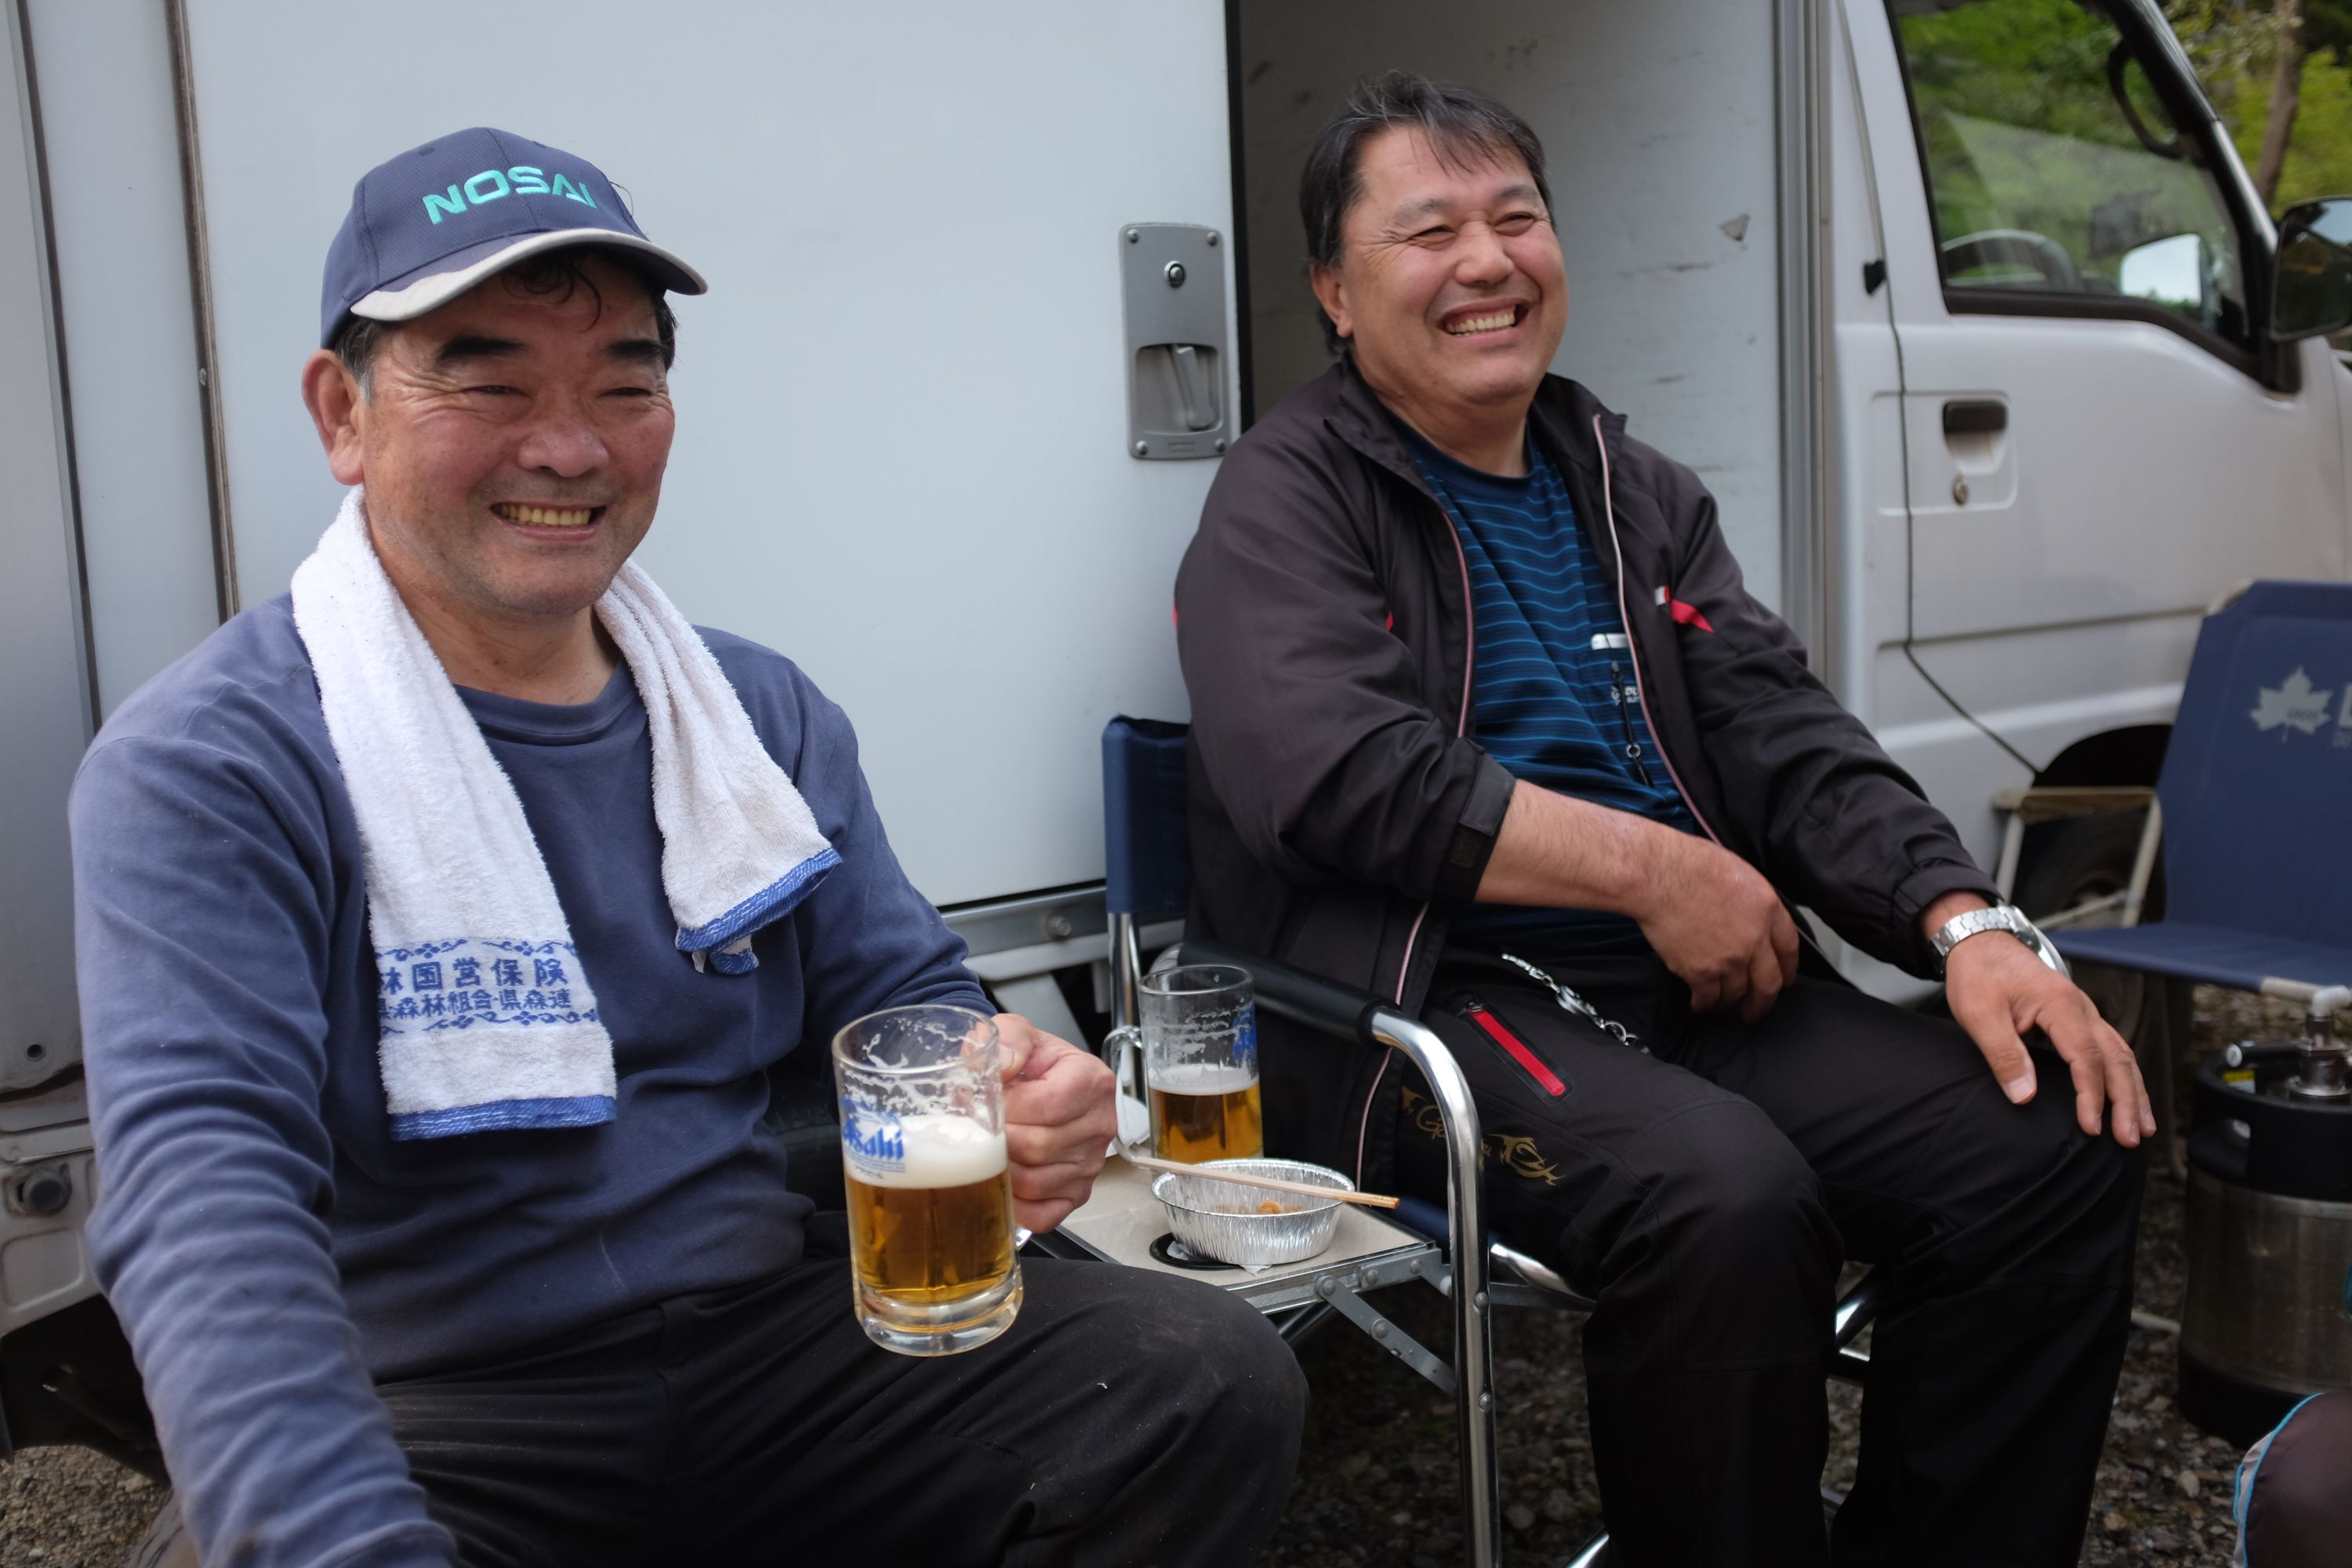 Two Japanese men sit in camping chairs by a truck and enjoy large glasses of beer.